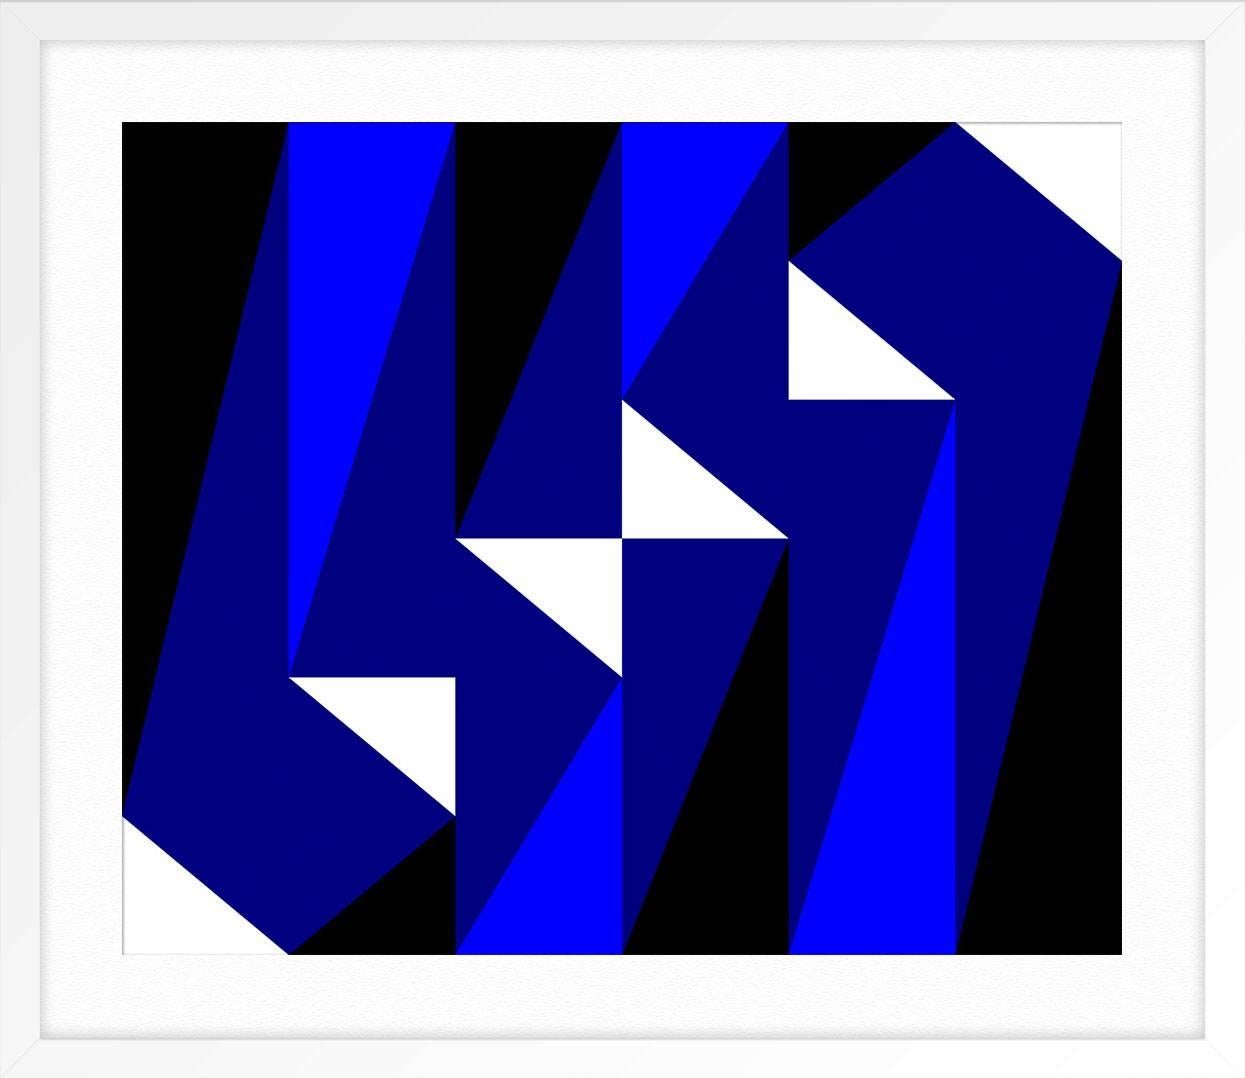 ABOUT THIS PIECE: Gary Andrew Clarke is a digital artist and painter. He lives in Manchester, England. The central preoccupation of his work is one of creating simple flirtatious encounters between geometric shapes and beautiful intense flat fields